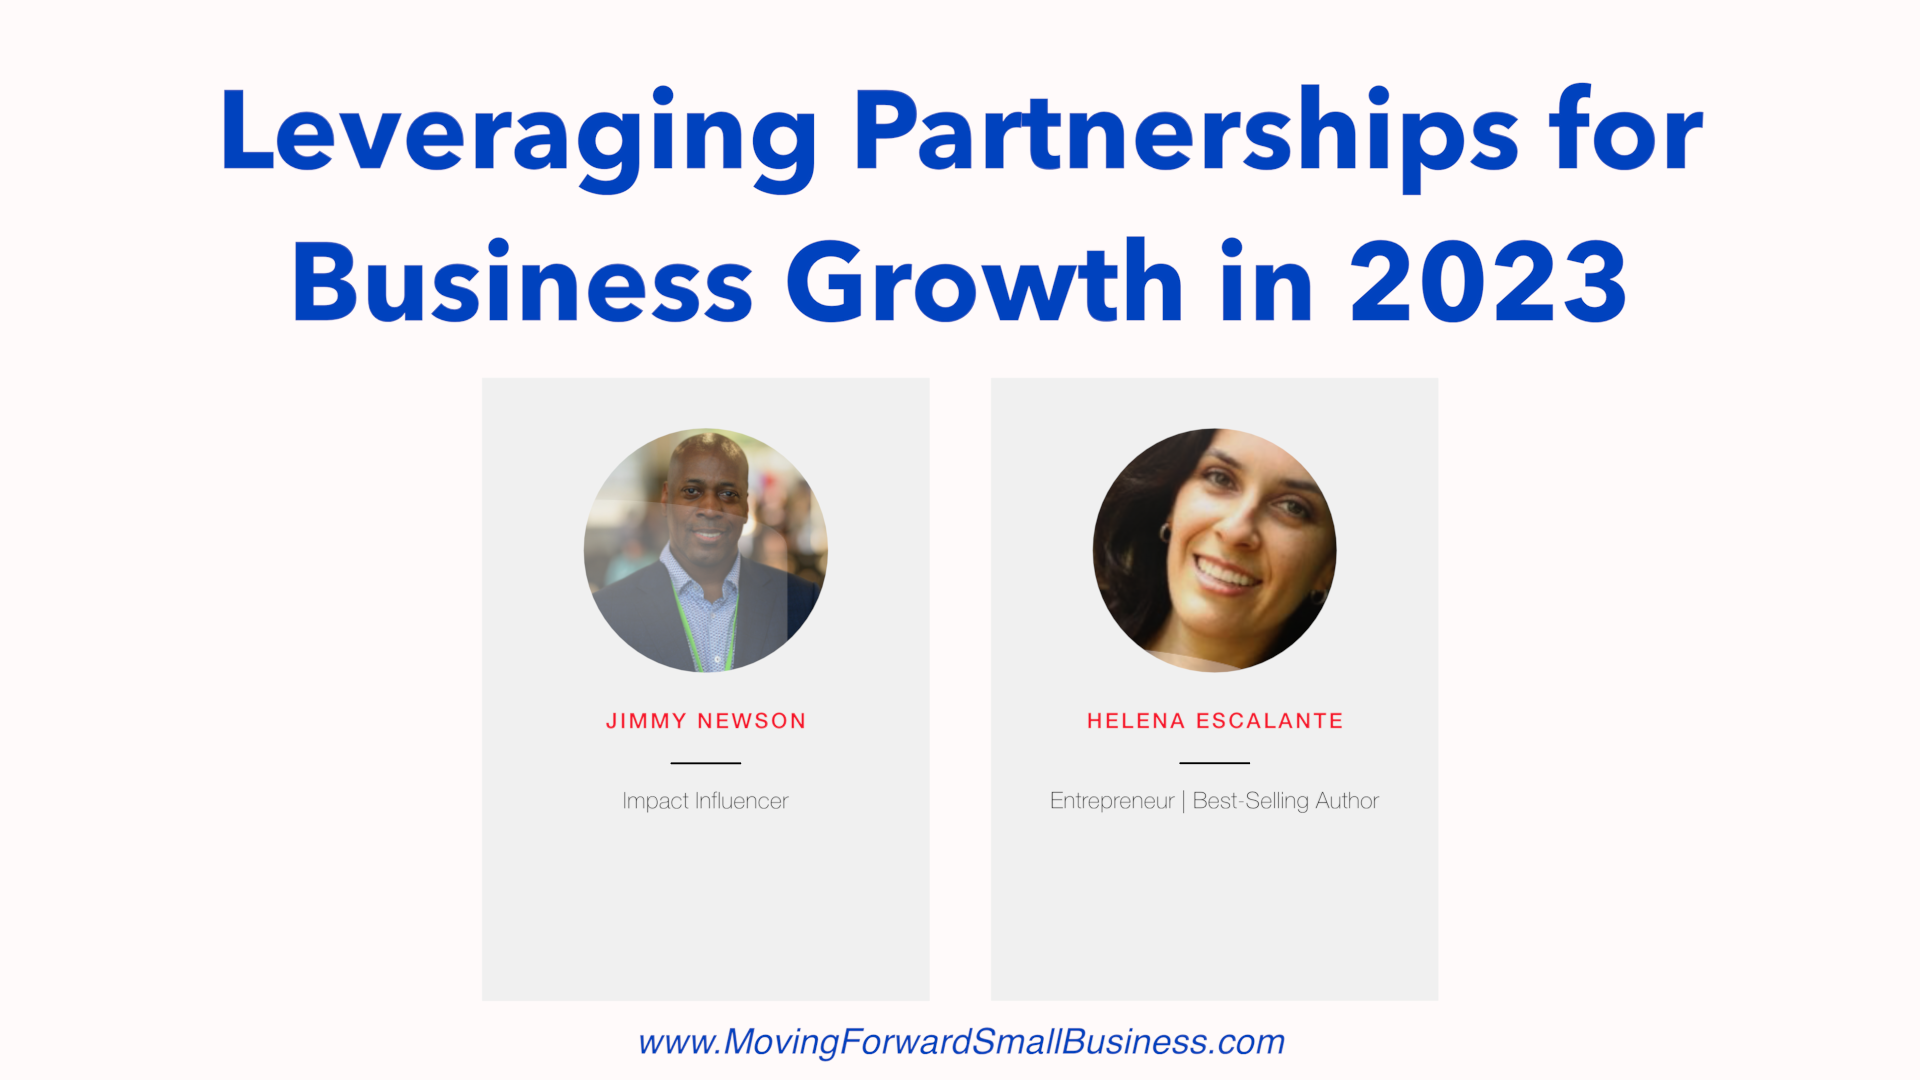 Leveraging Partnerships for Business Growth in 2023